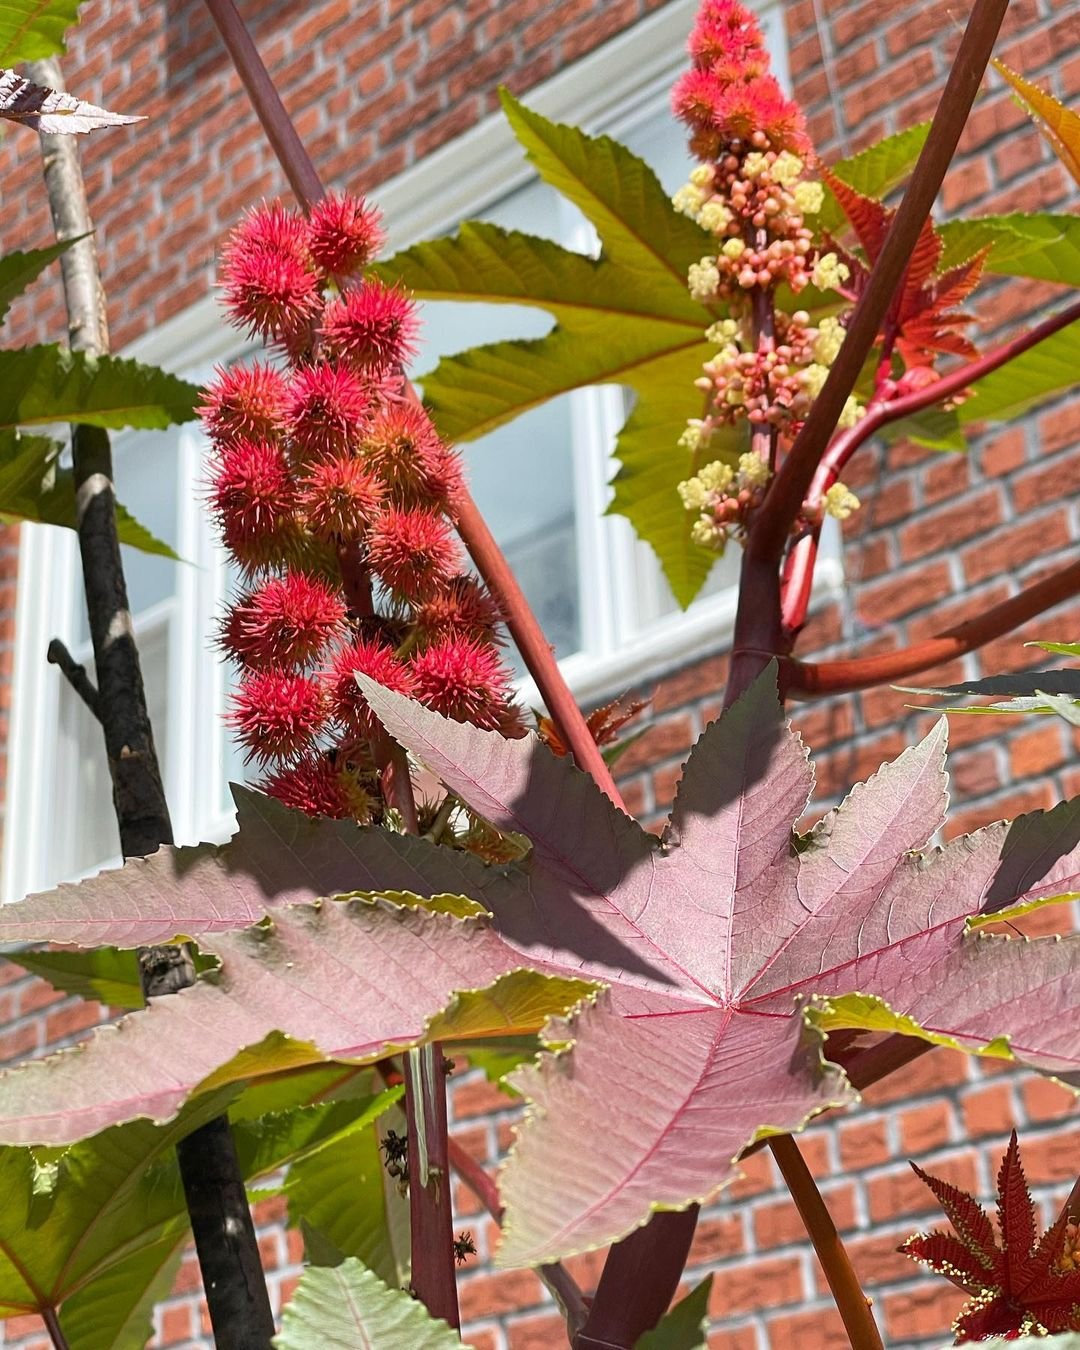 Red-flowered Castor Bean Plant in Nature's  front of brick building.